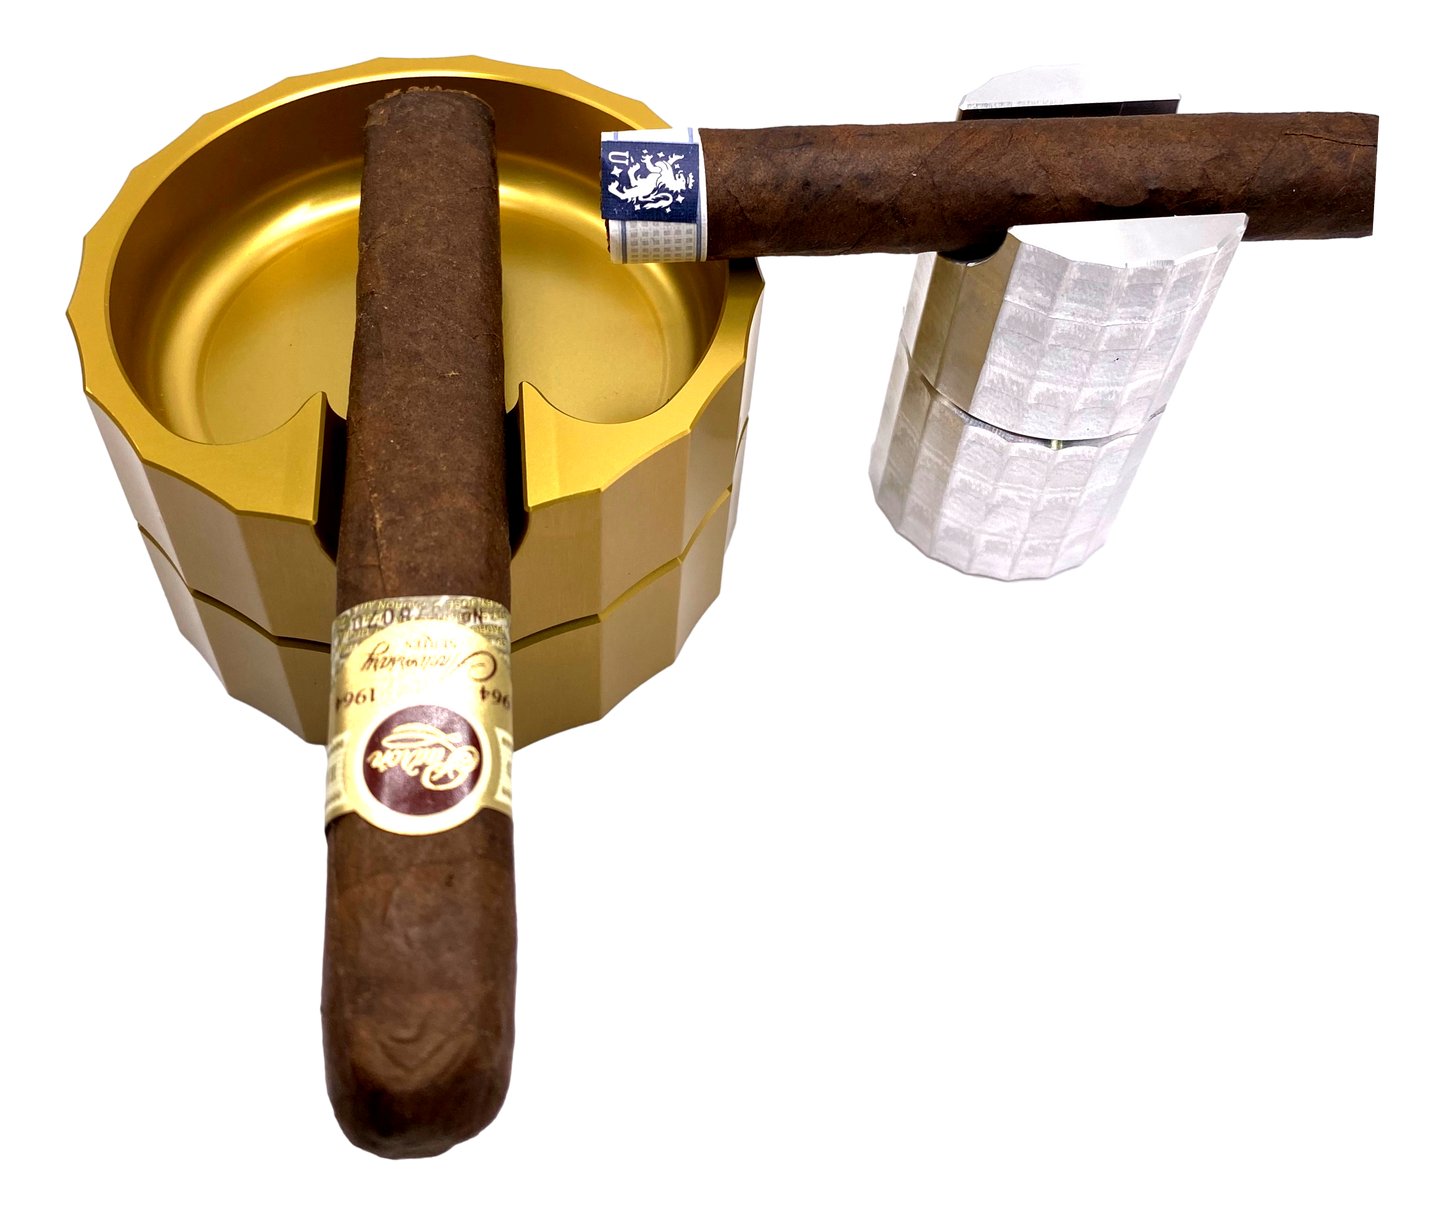 Parthenon Cigar Ash Tray Delivers End of May 2022